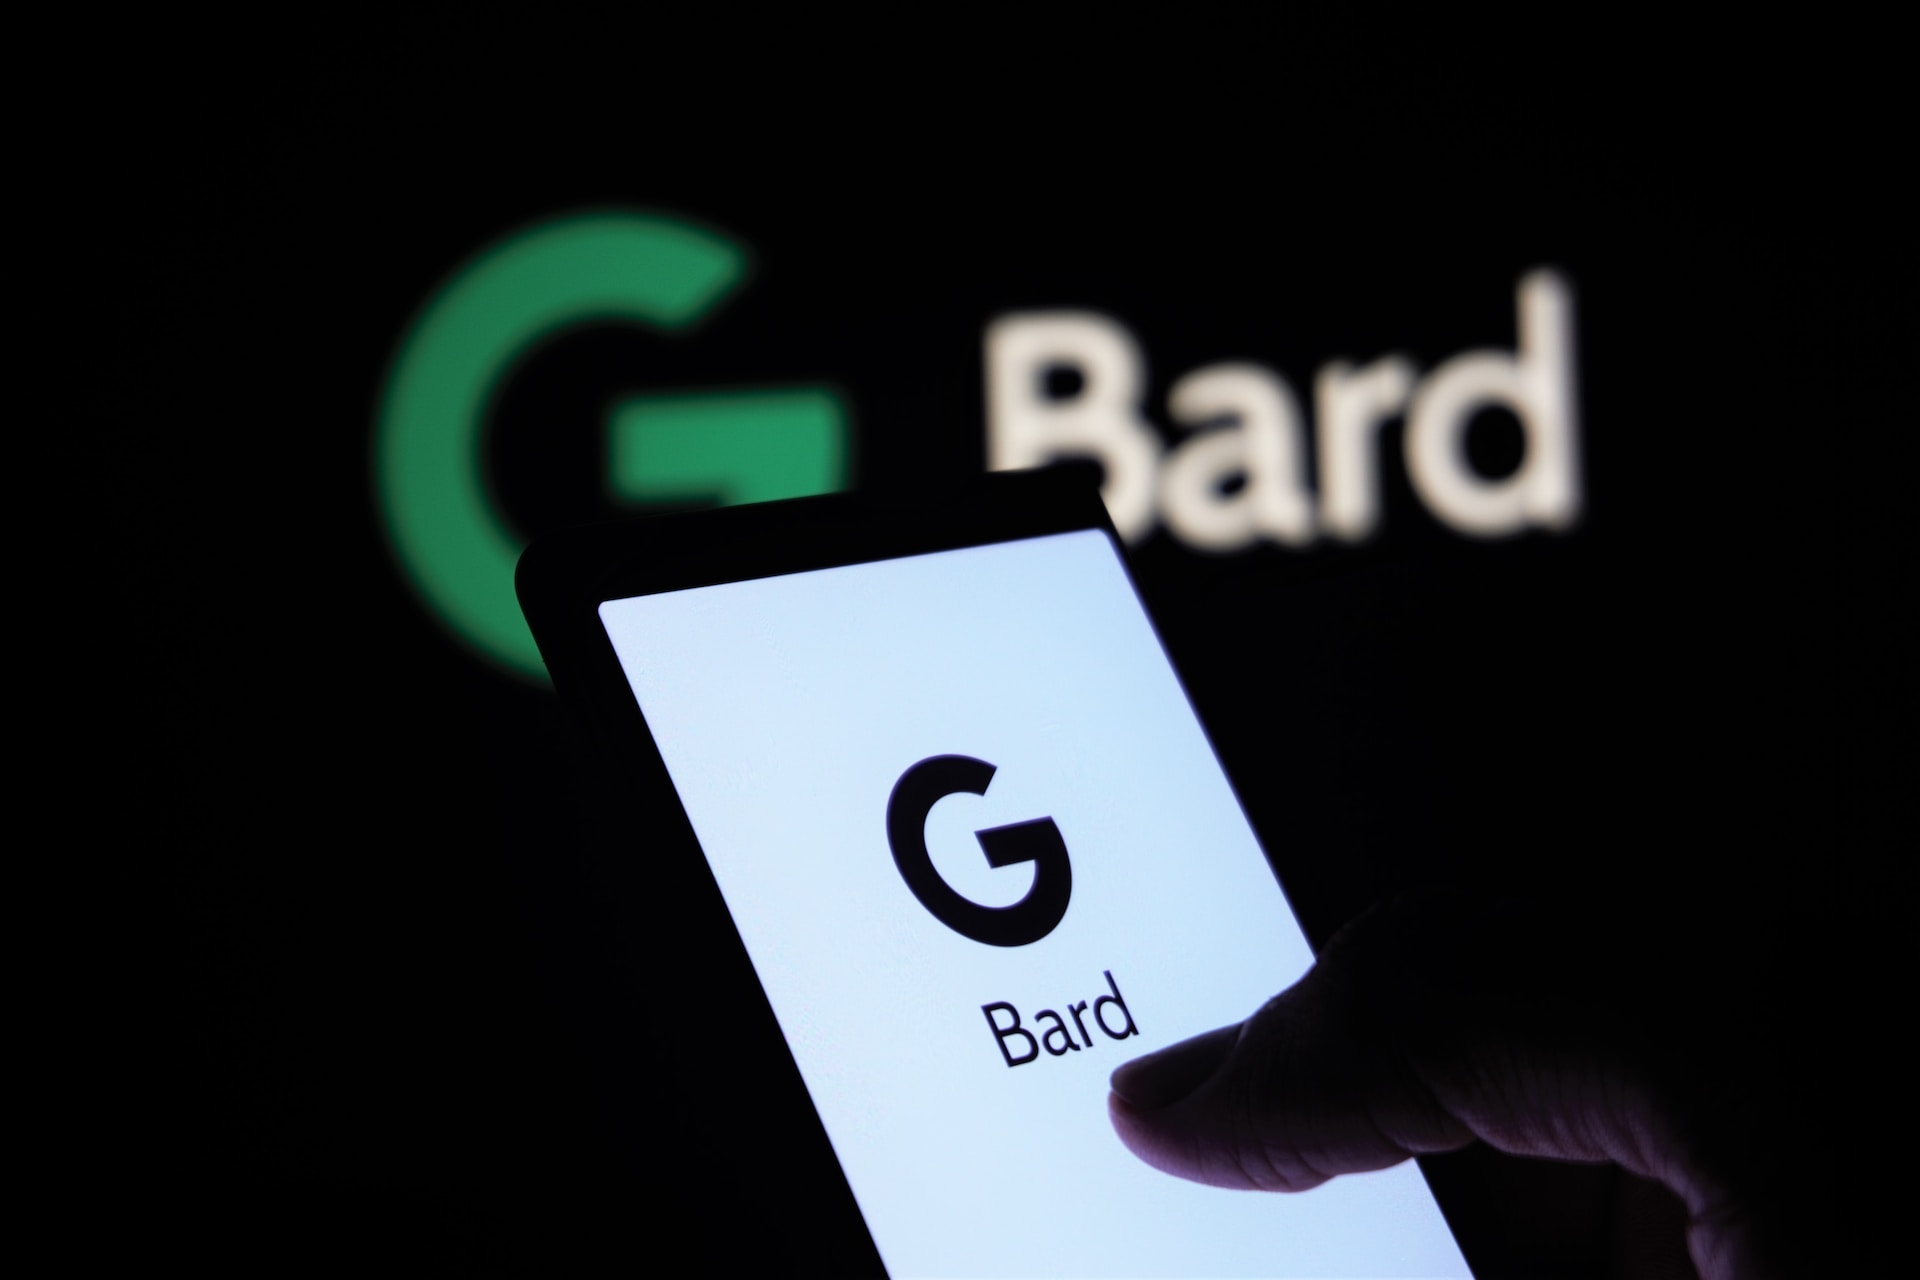 Google Bard & Person Holding Phone